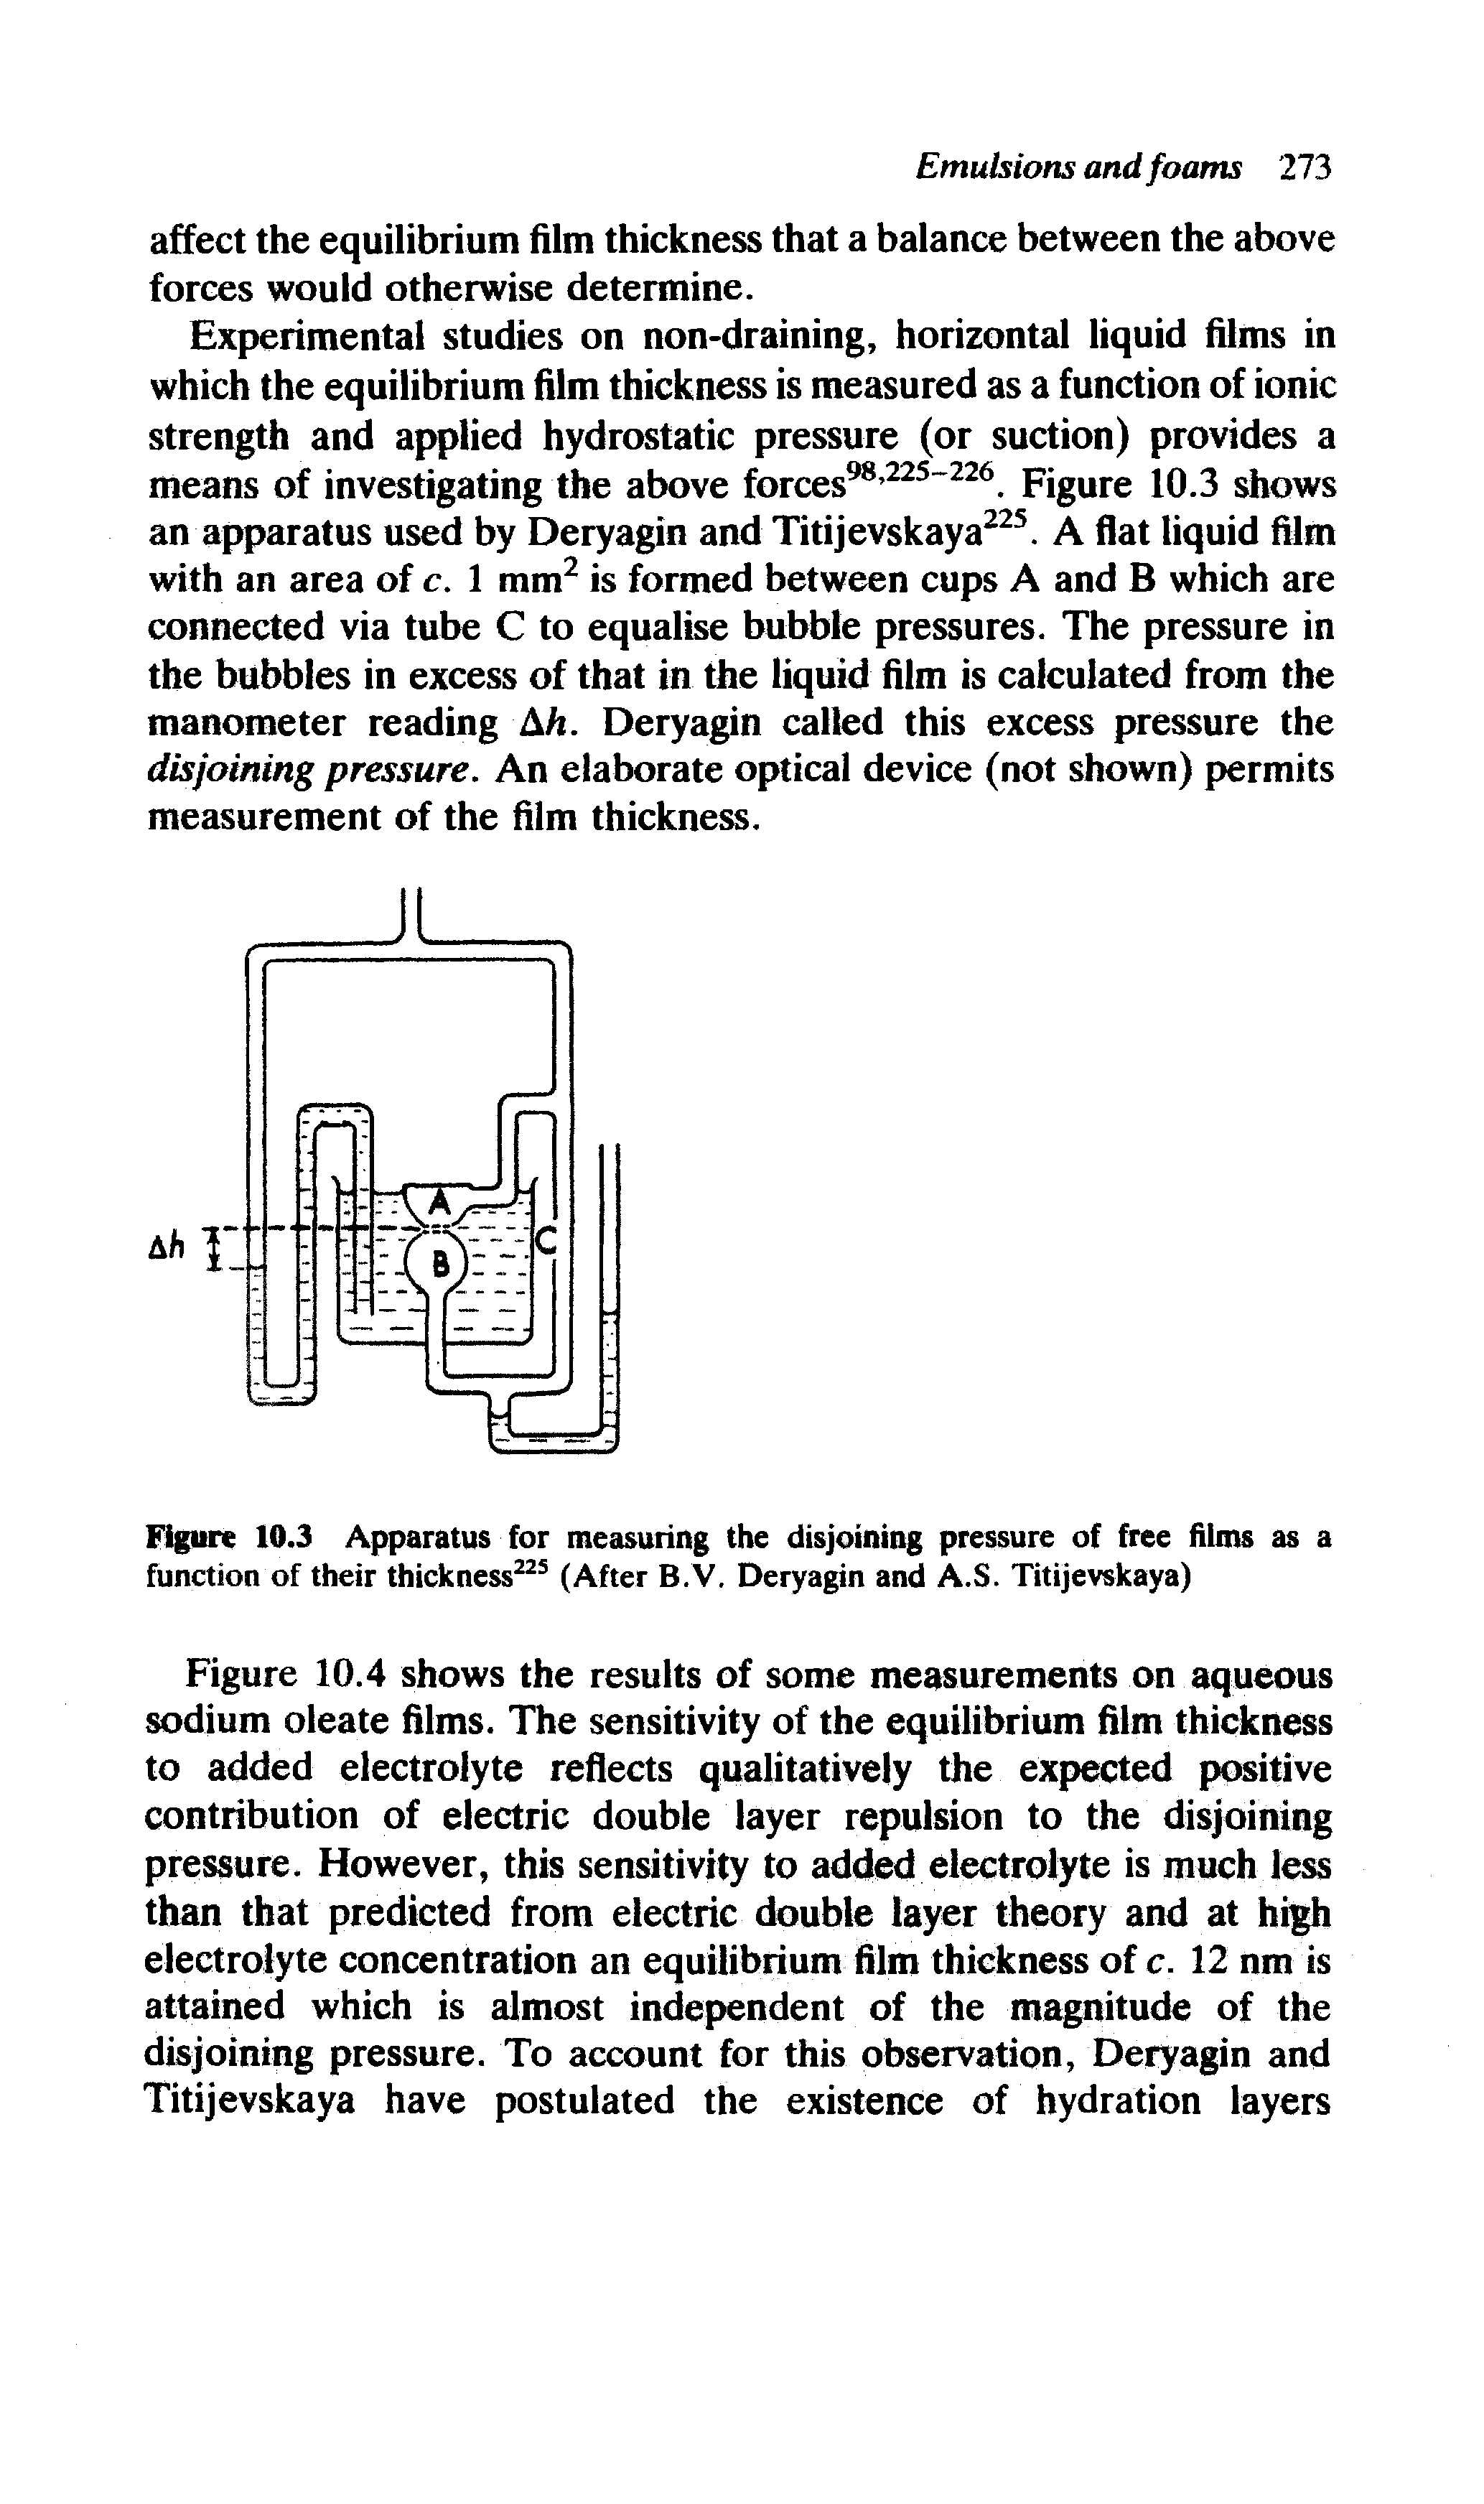 Figure 10.3 Apparatus for measuring the disjoining pressure of free films as a function of their thickness225 (After B.V. Deryagin and A.S. Titijevskaya)...